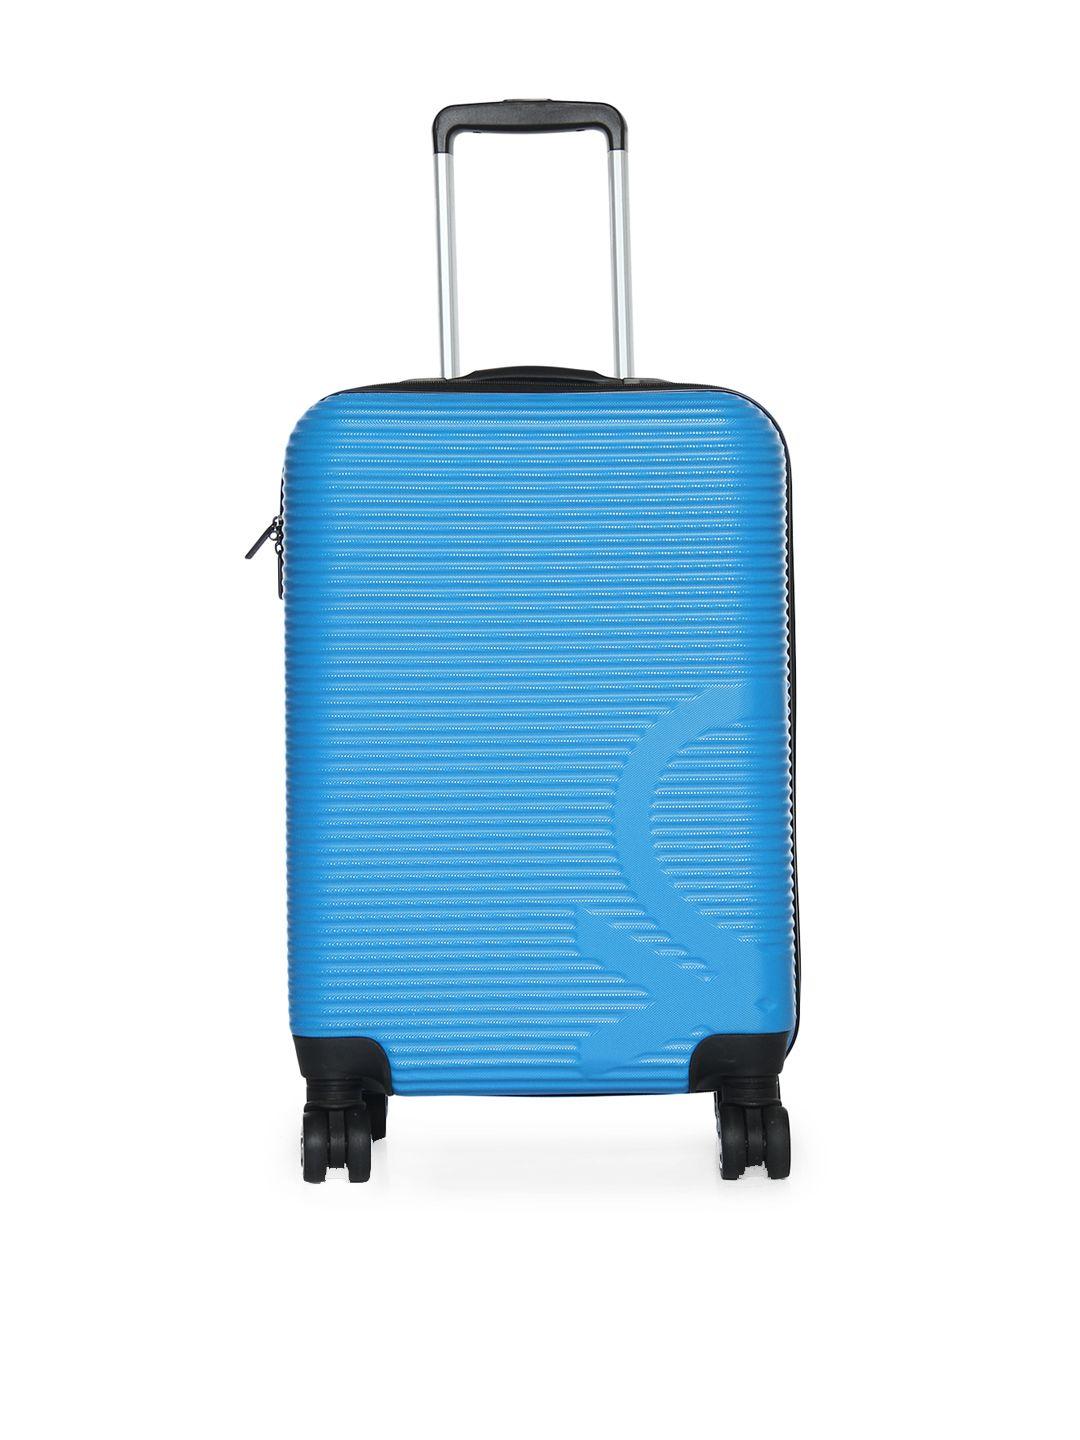 united colors of benetton unisex blue cabin trolley suitcase